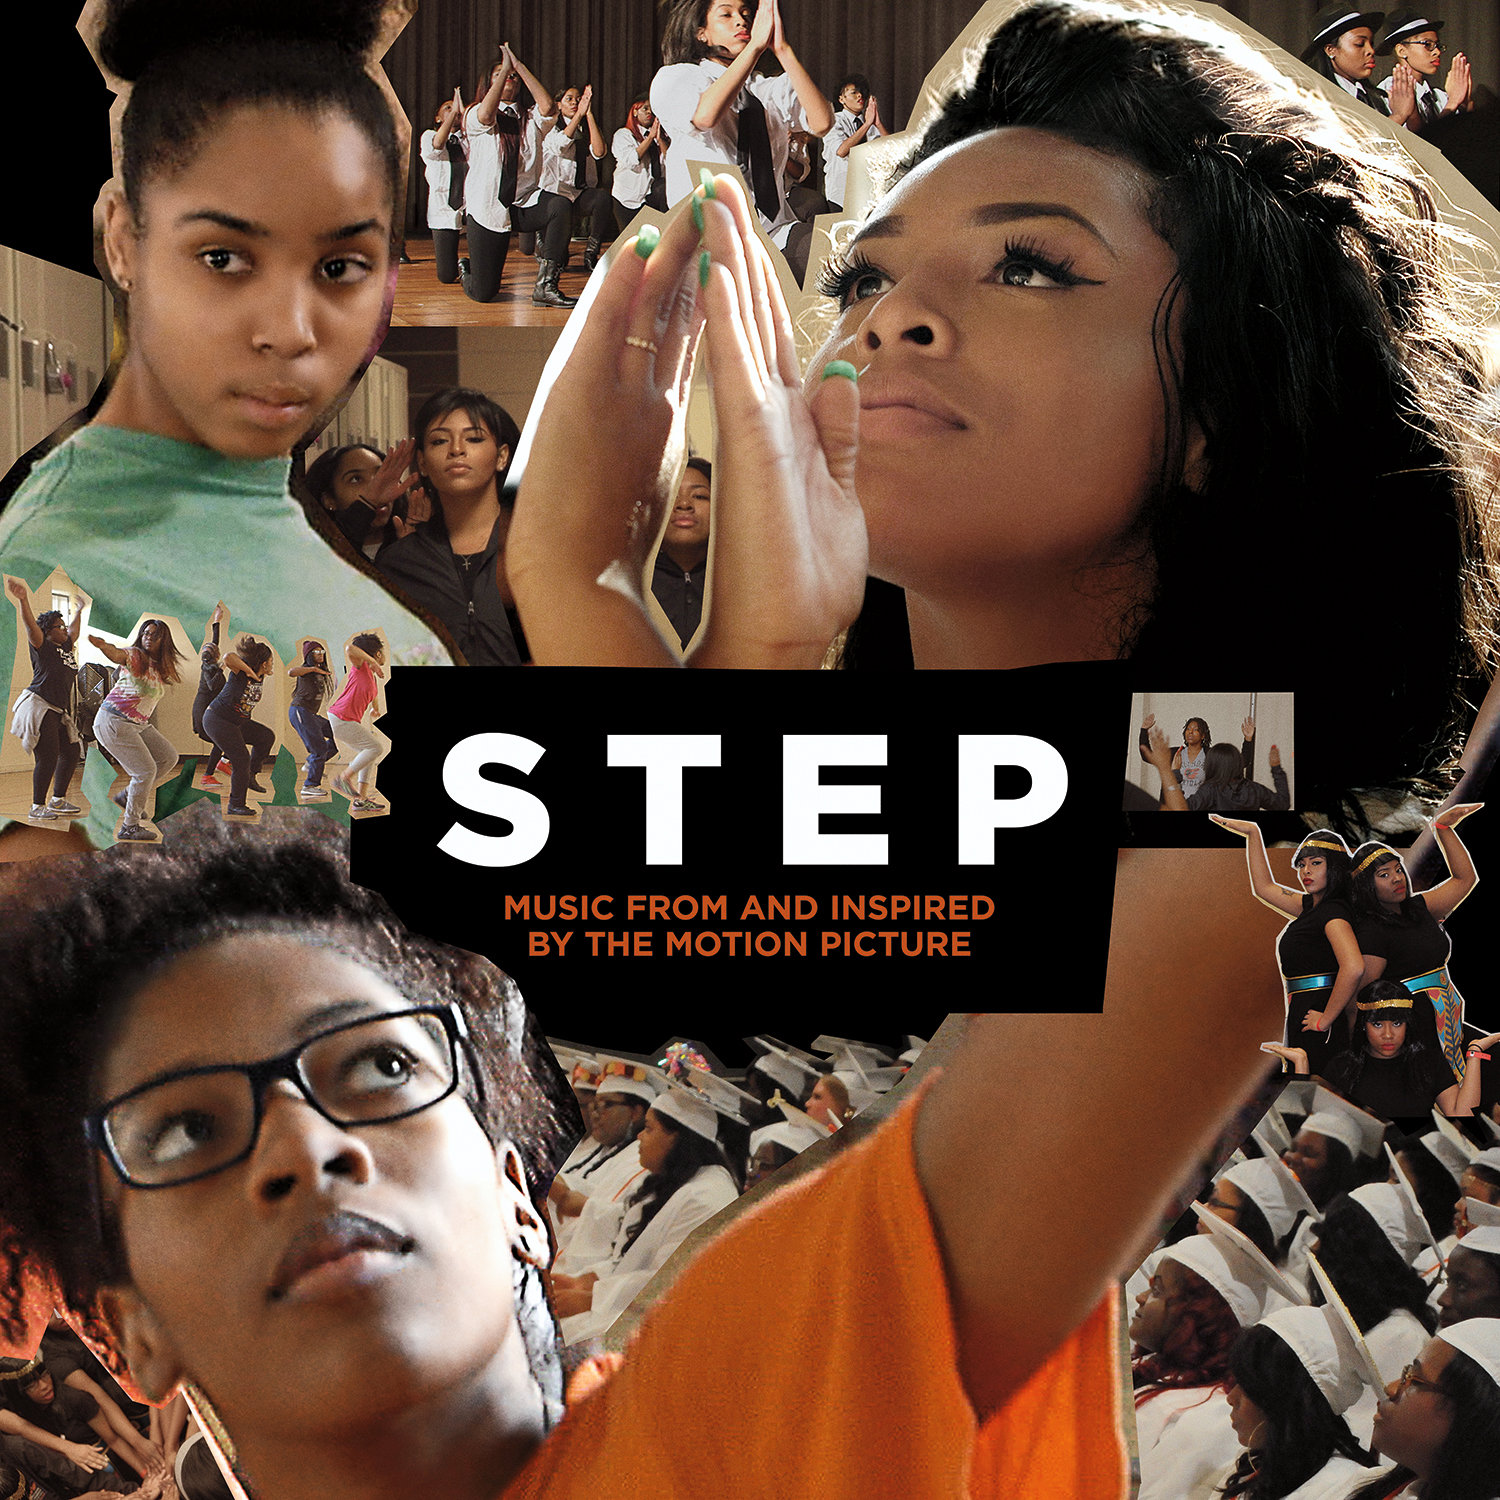 Step музыка. Music from and inspired by the Motion picture). Step by Step песня. Стэп песня.